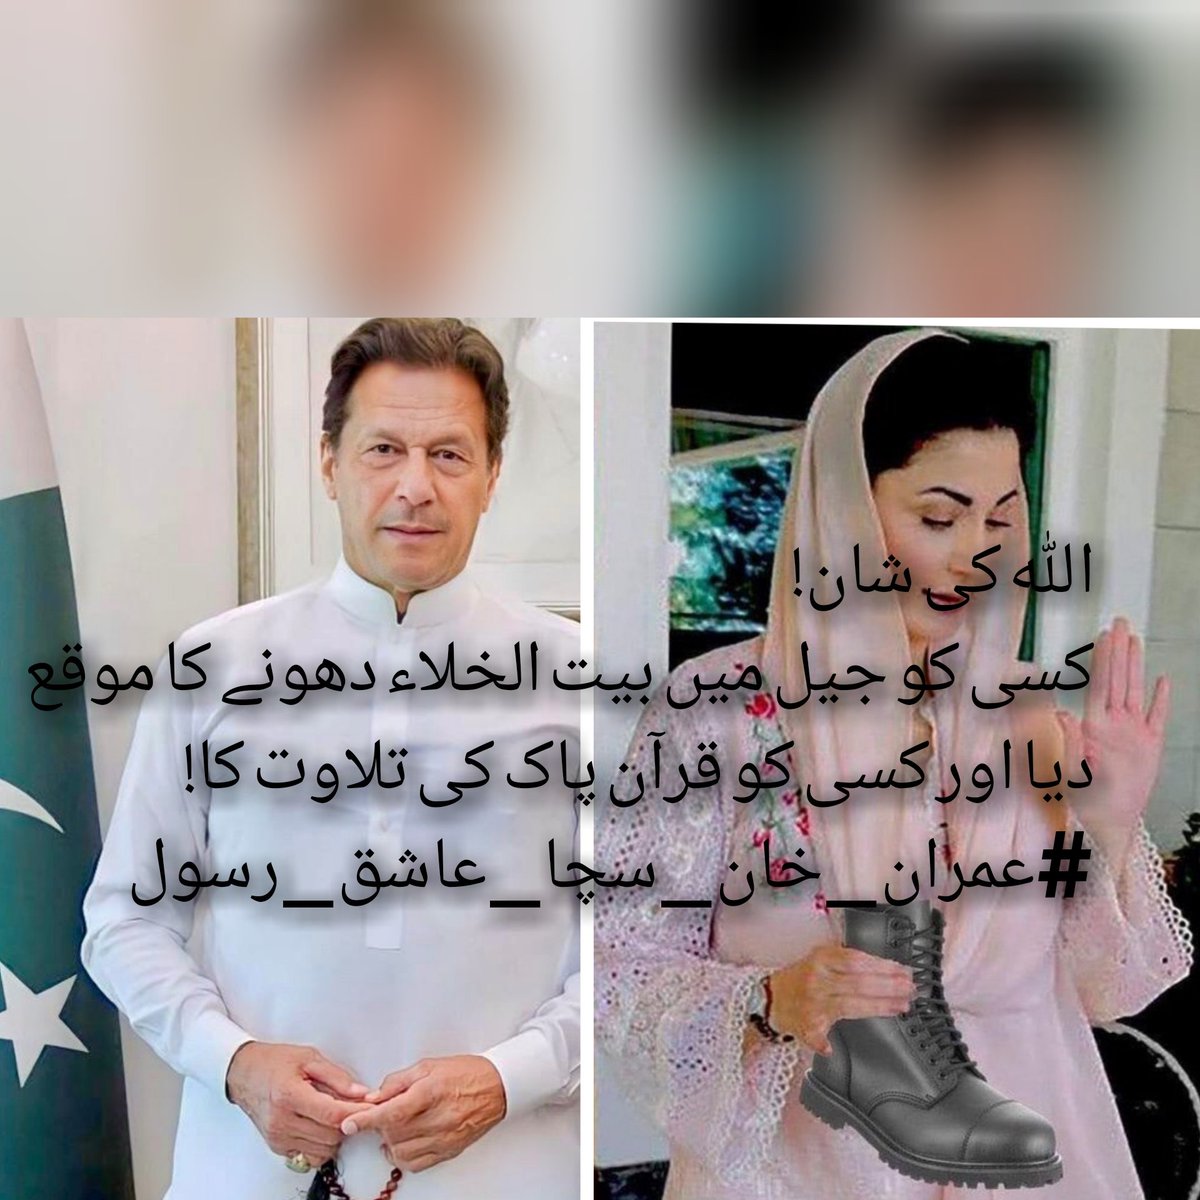 In a nine foot death cell, Imran Khan asked for Holy Quran for recitation.. While Nawaz Sharif in air conditioned fully equipped cell kept busy in negotiations with state to escape Pakistan! #عمران_خان_سچا_عاشق_رسول @TeamPakPower